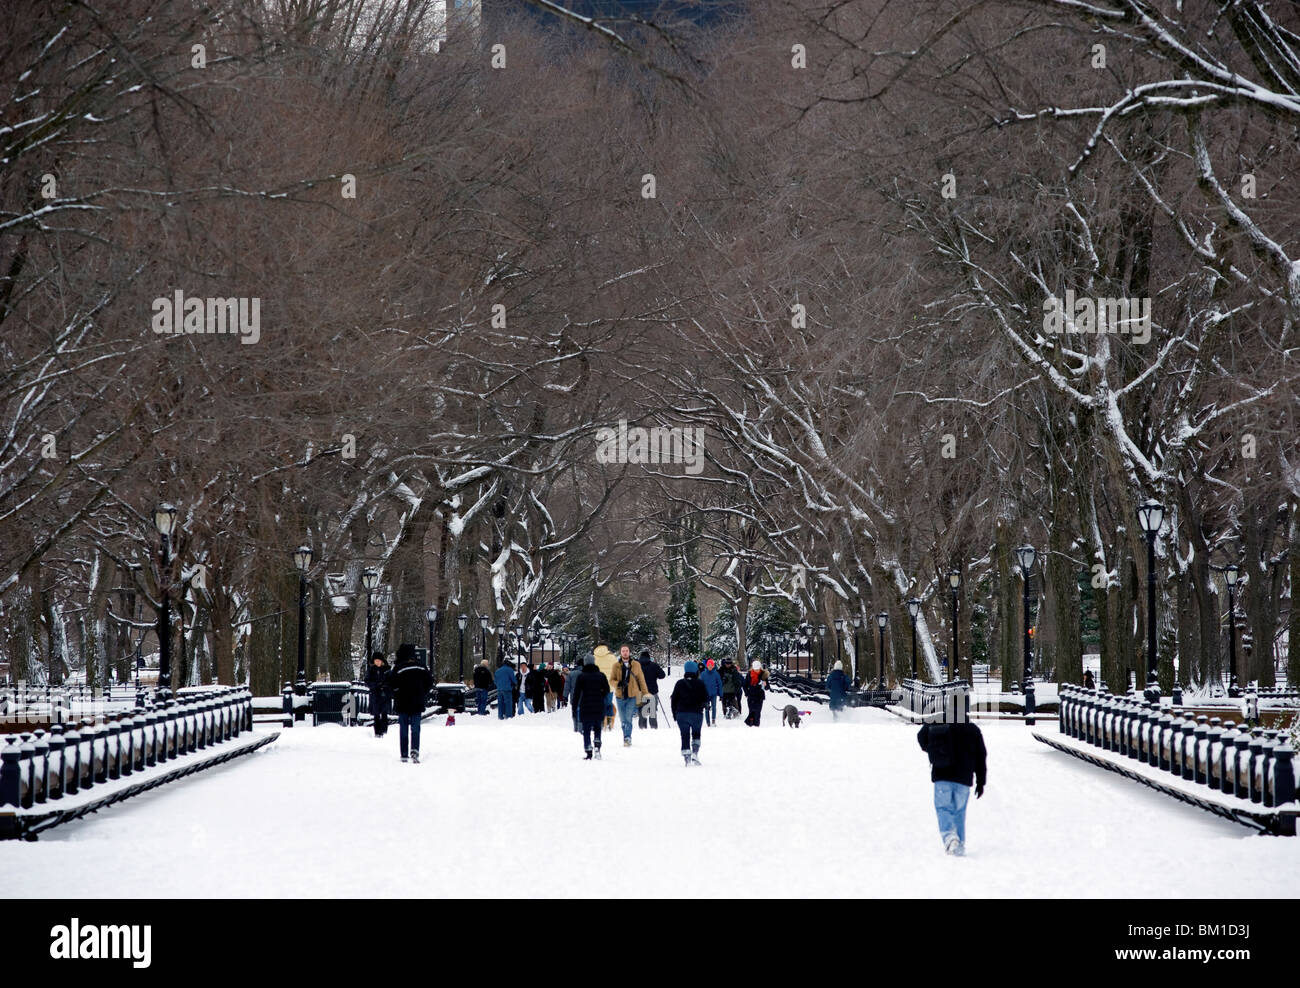 People walking through the mall in Central Park after a snowstorm, New York City, New York State, United States of America Stock Photo